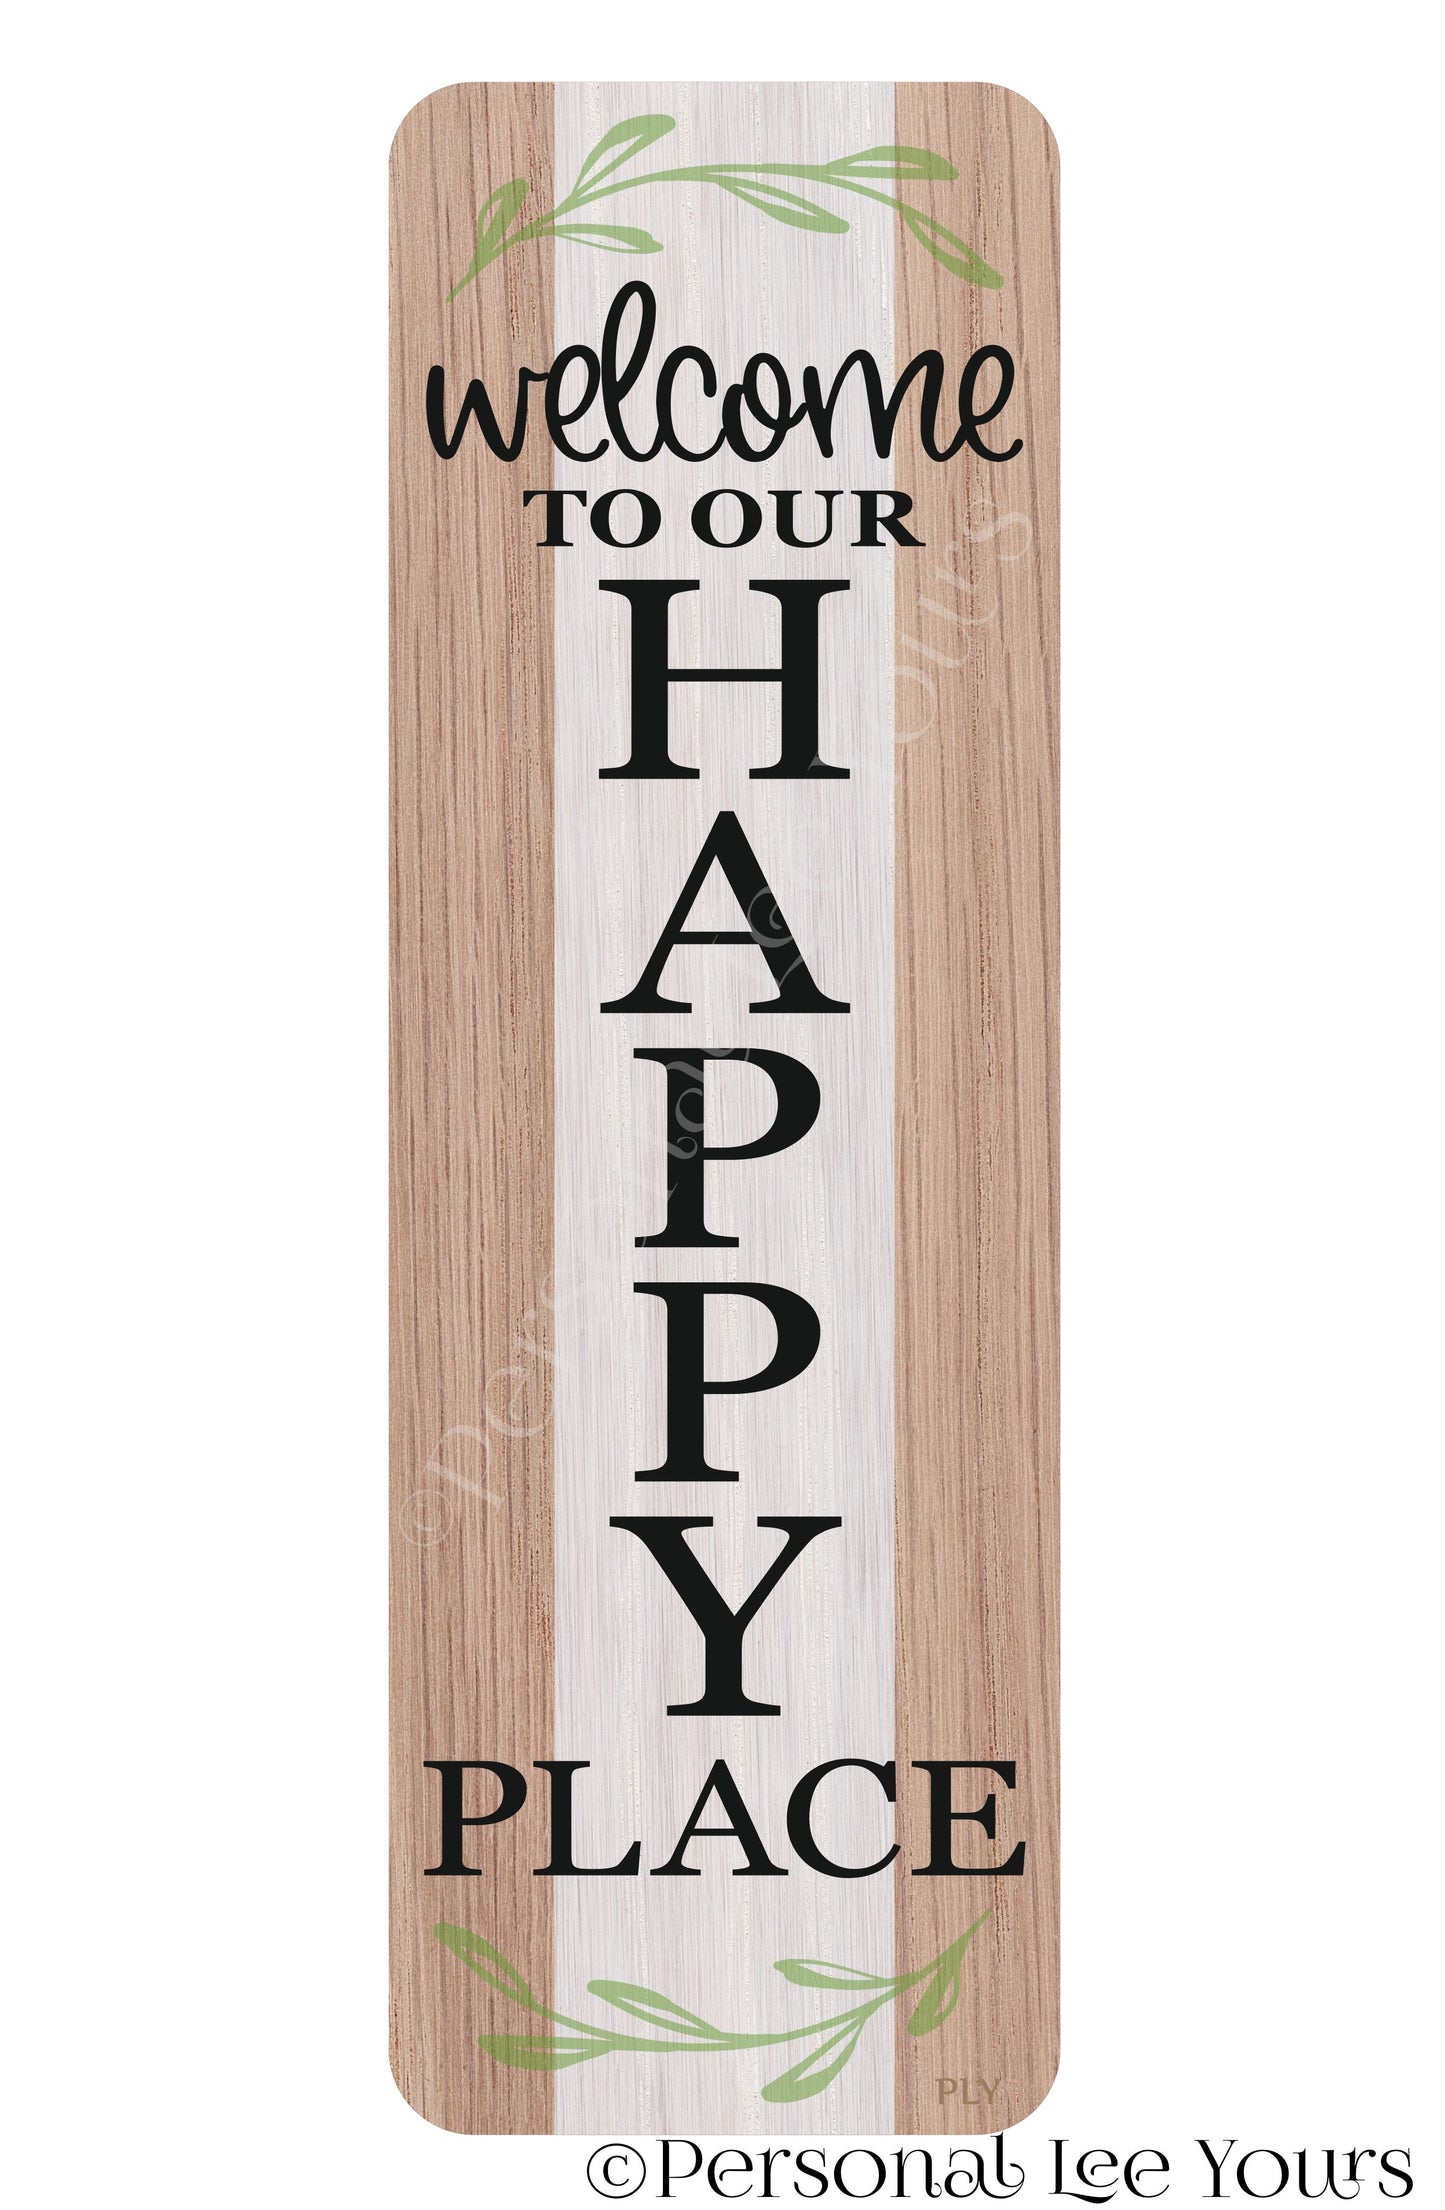 Wreath Sign * Farmhouse Banner * Welcome To Our Happy Place * 4" x 12" * Lightweight Metal